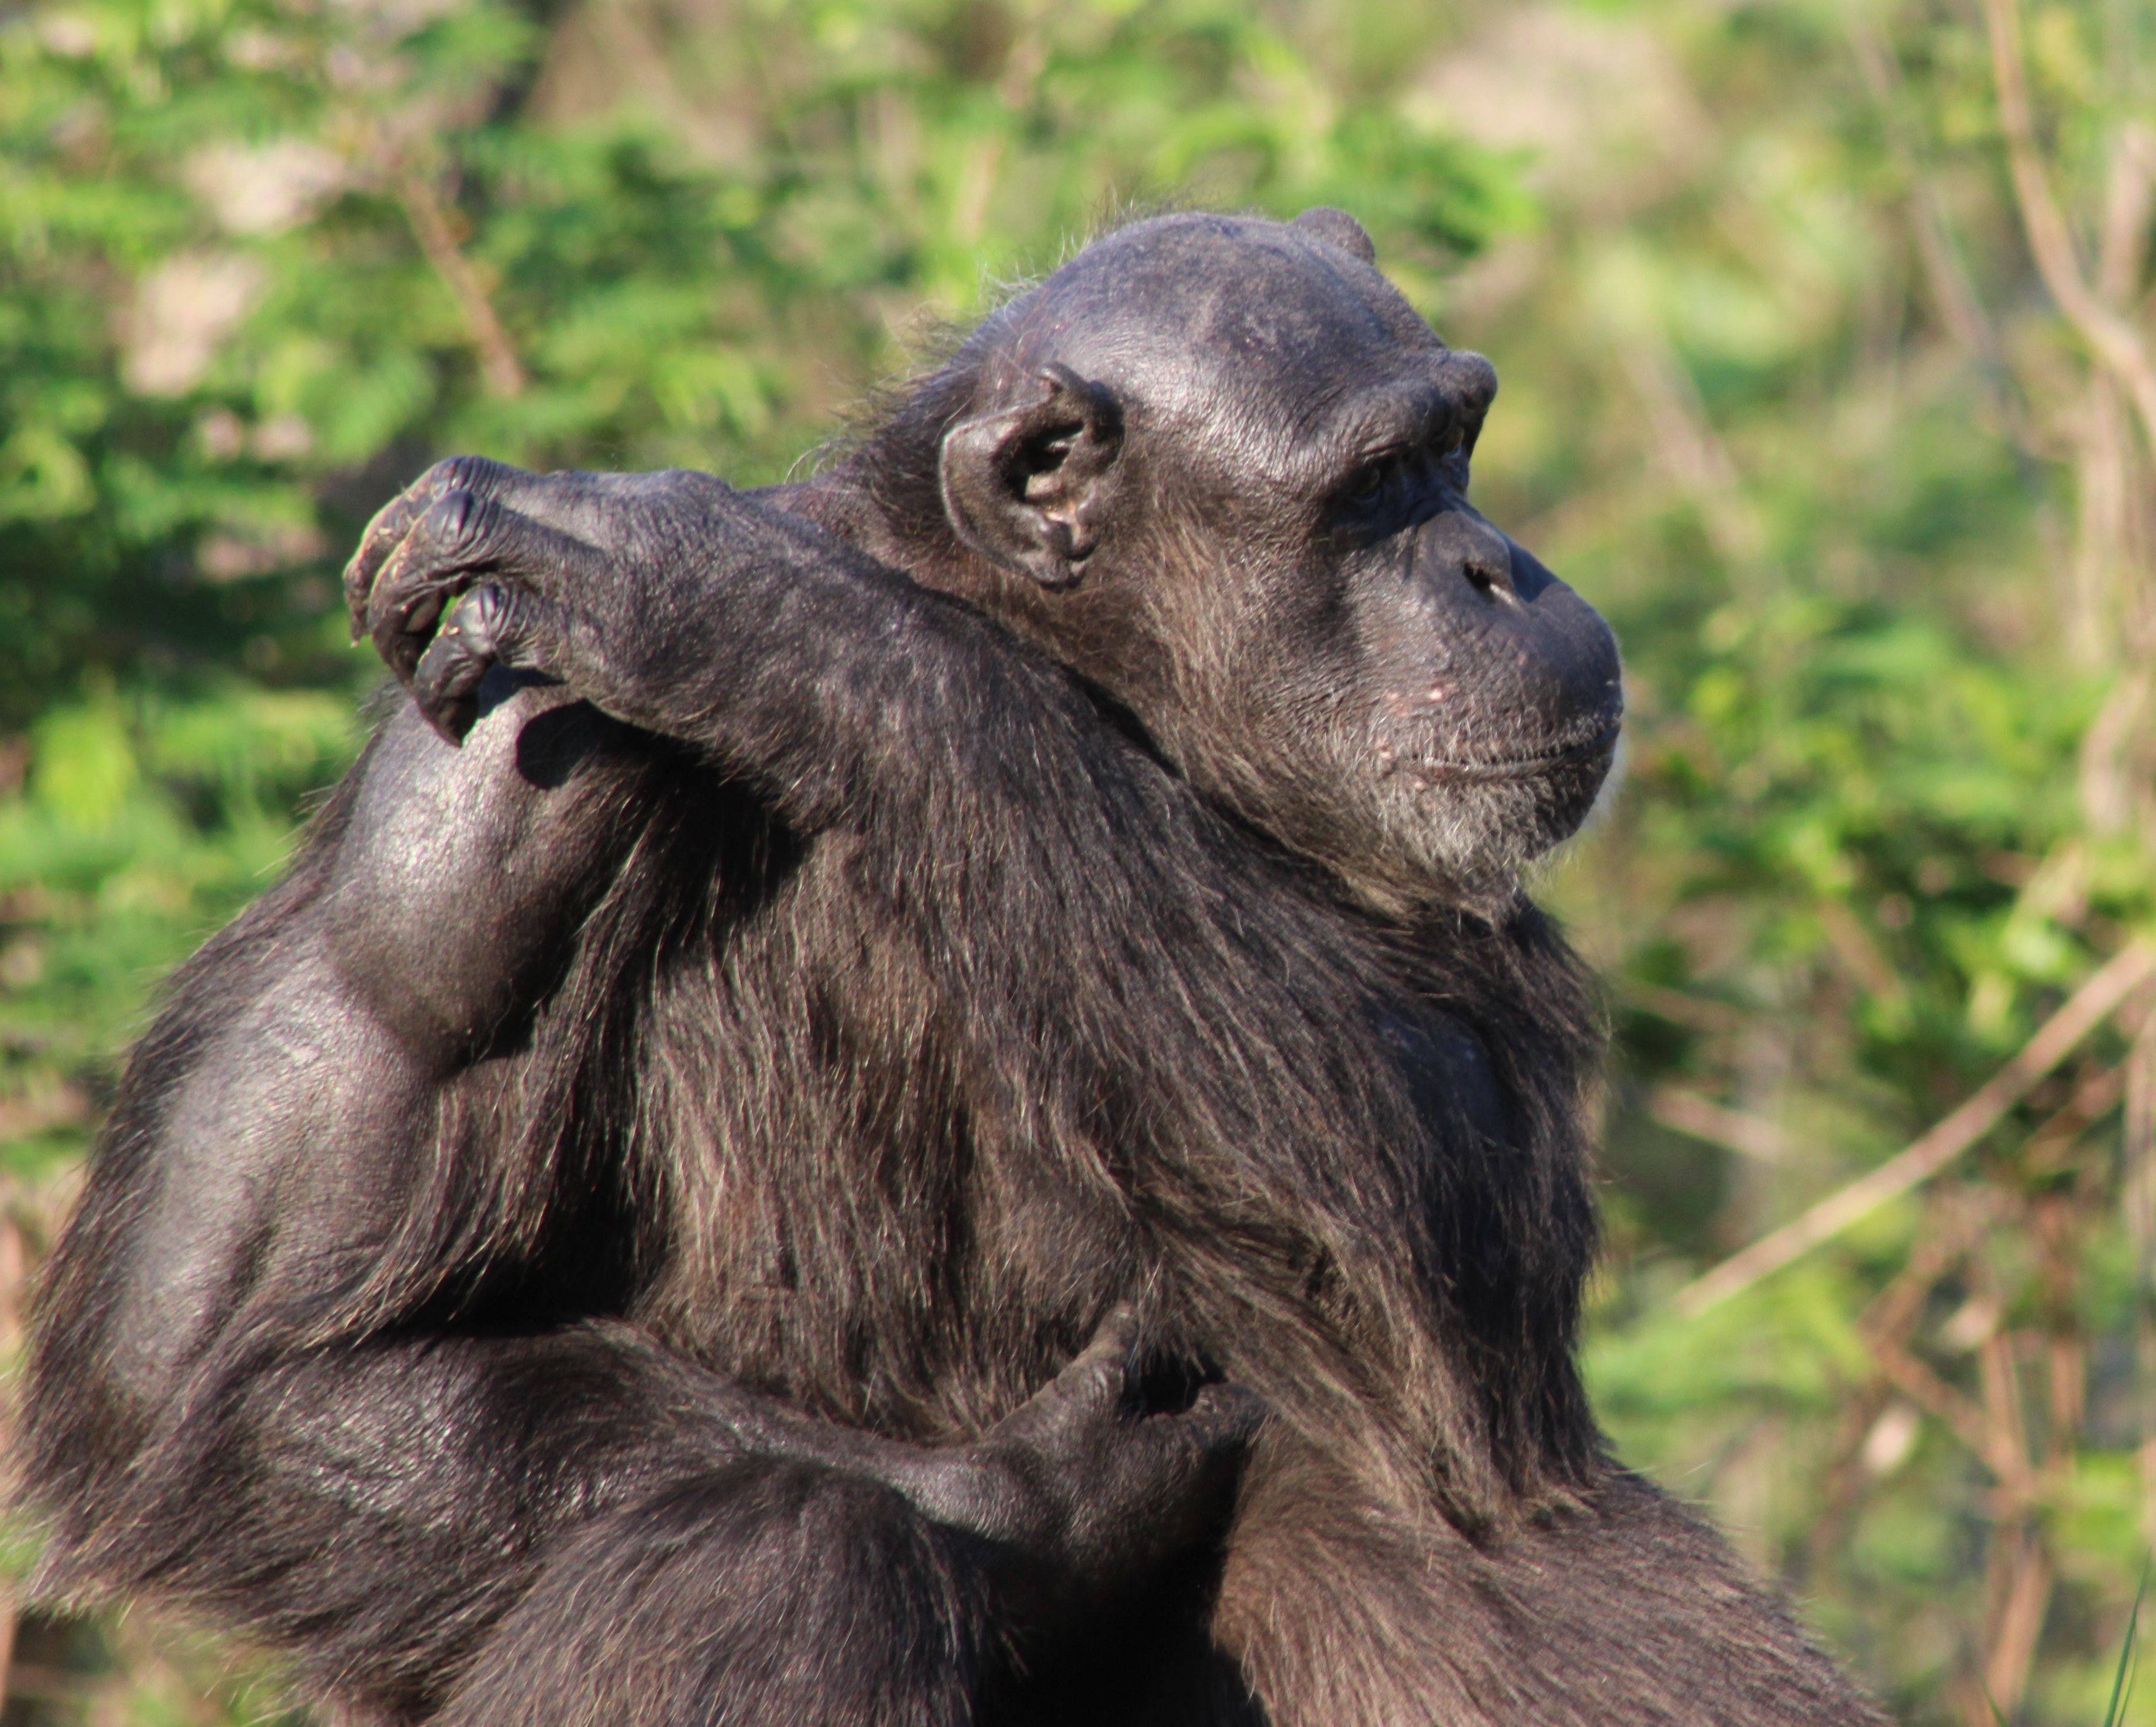 The muscles of the gorillas and chimpanzees still develop even though they do not apply any training methods.